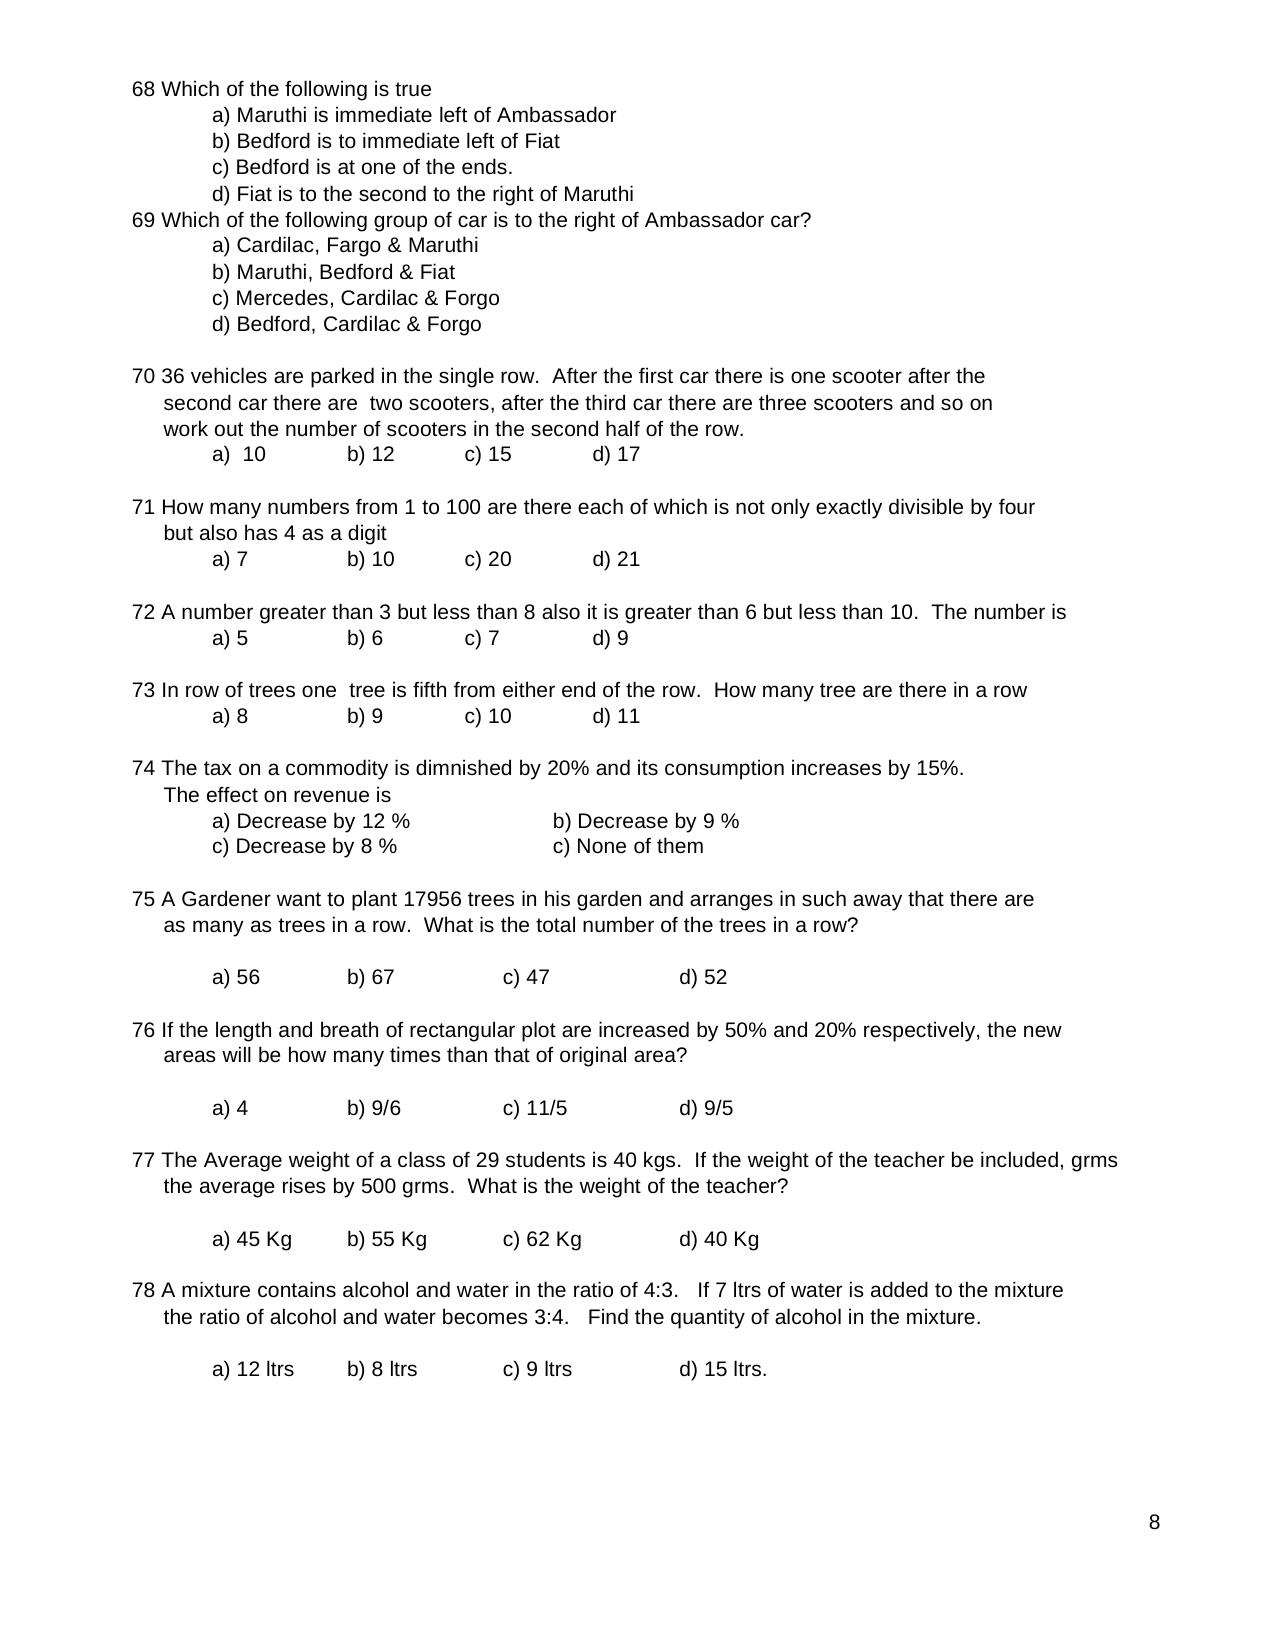 TNPSC Assistant System Engineer Sample Papers Numerical Ability - Page 8